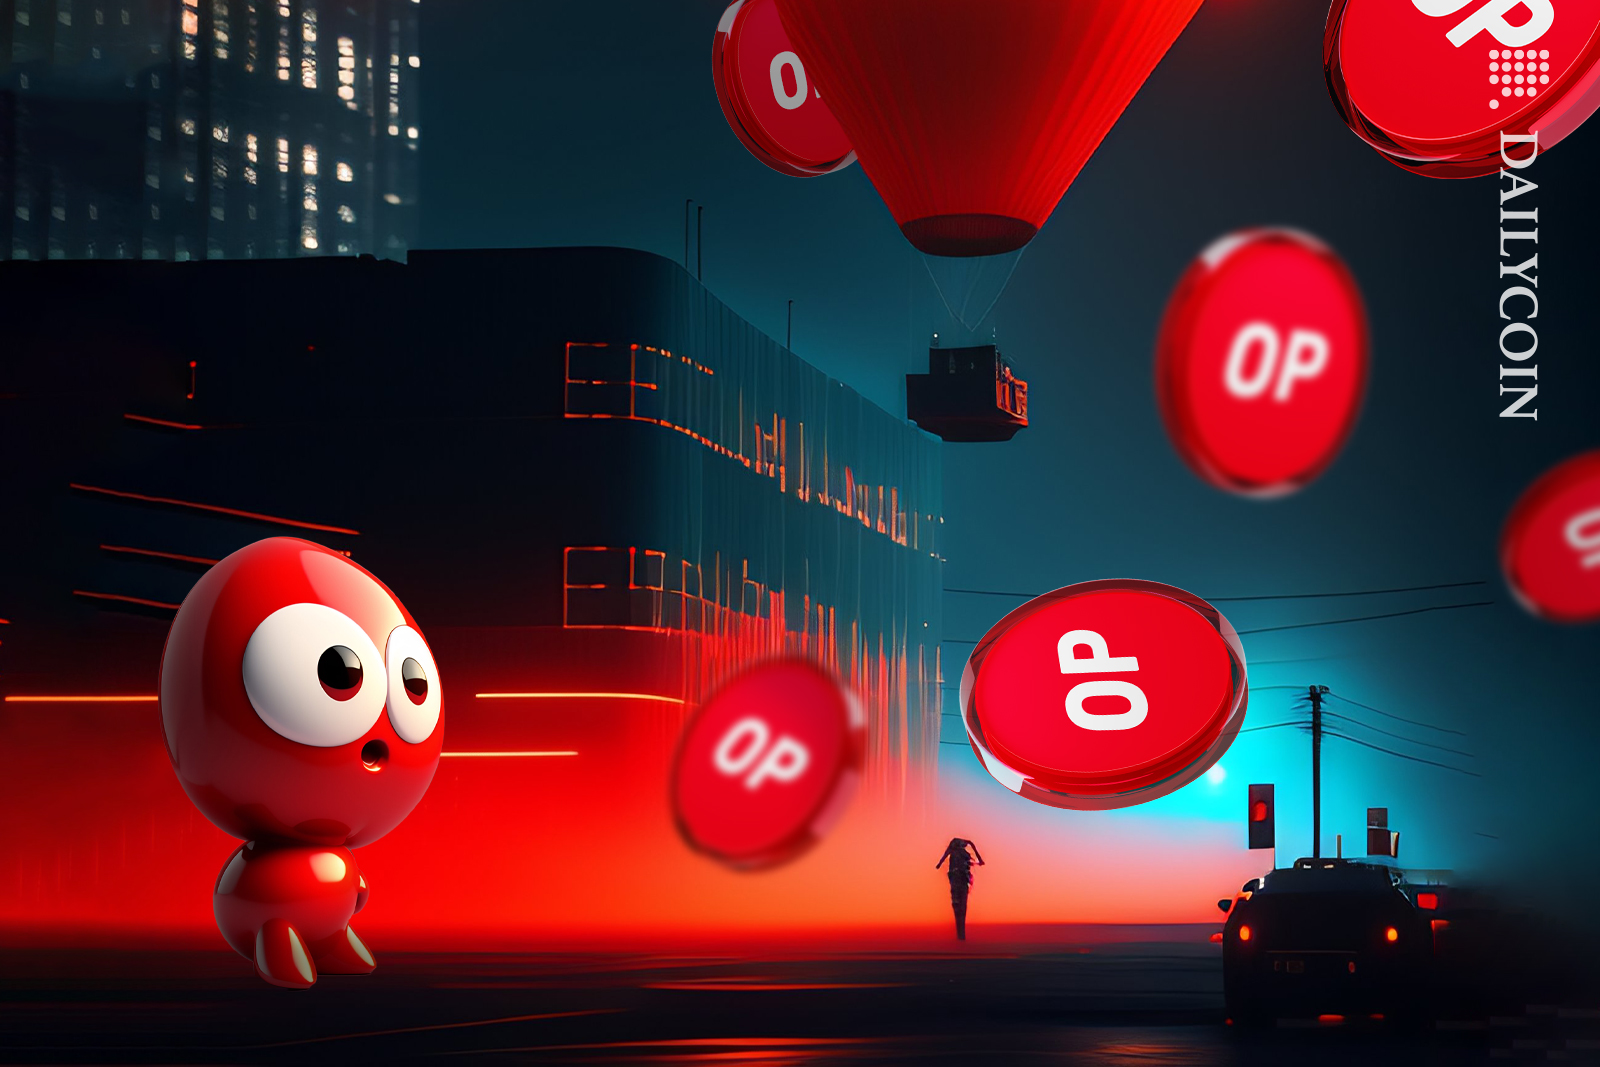 Optimism coins dropping from the air, a little red character is shocked.